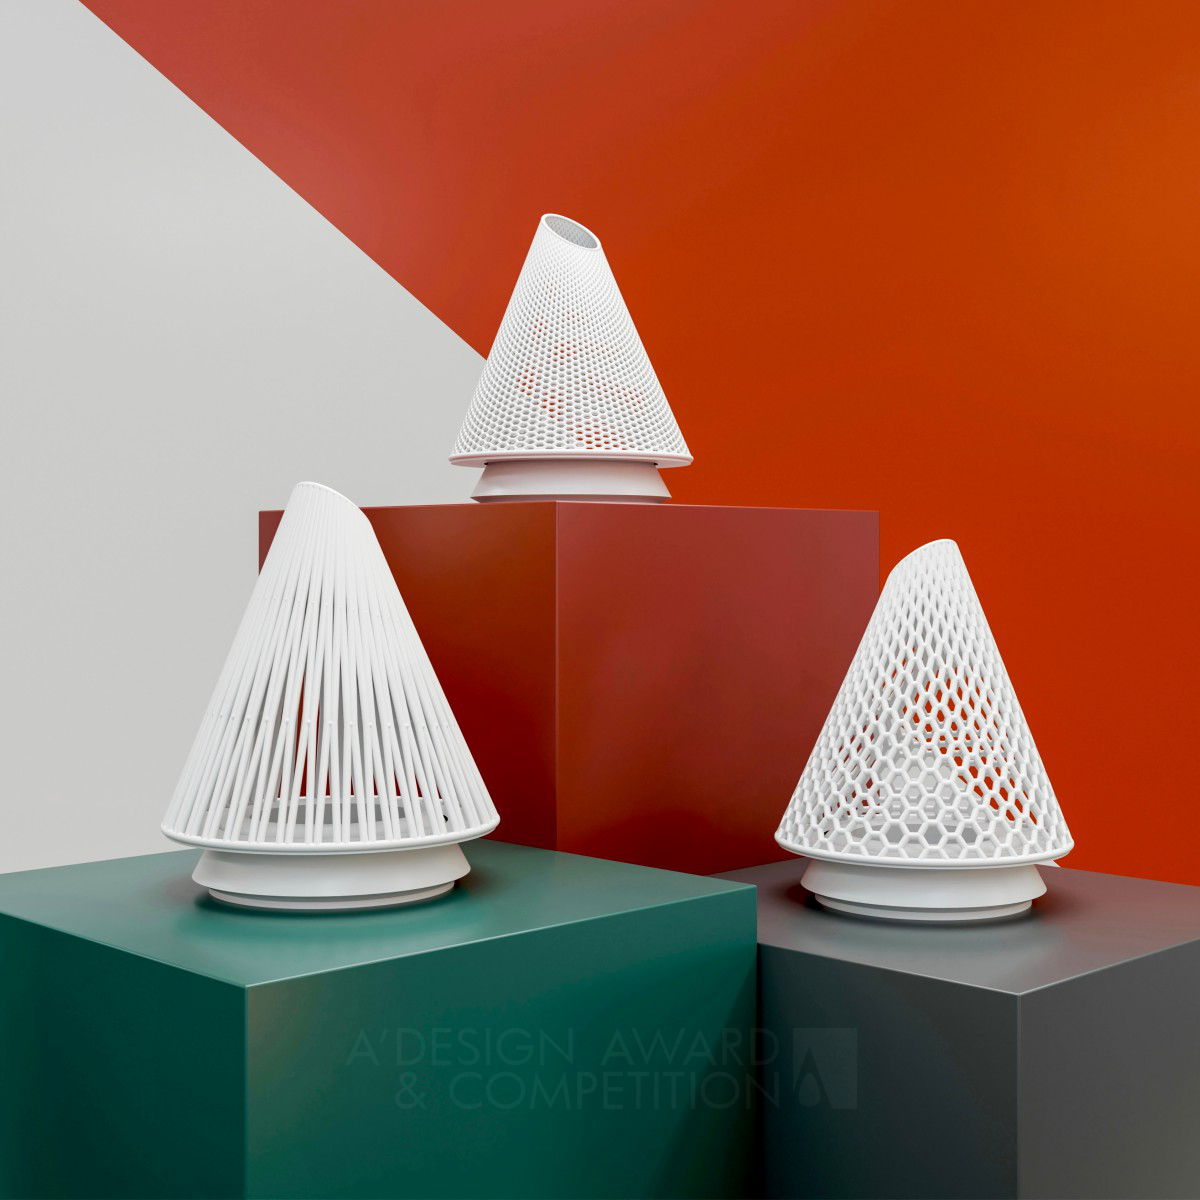 Kezia Age wins Iron at the prestigious A' 3D Printed Forms and Products Design Award with The Conequeror Lamp.